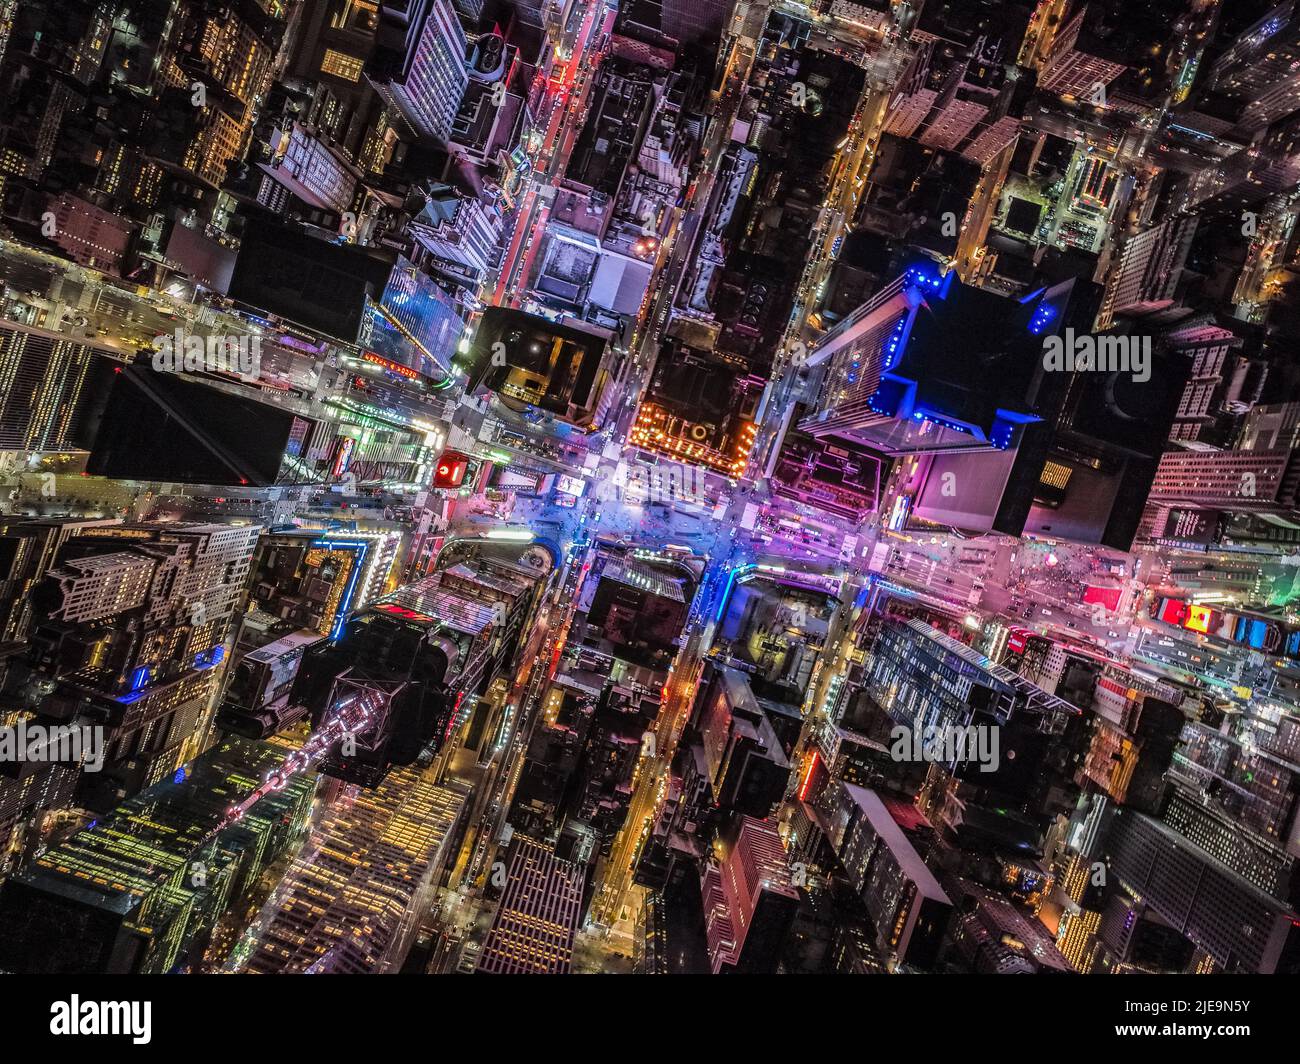 Overhead shot of buildings and streets around Times Square. Advertisements and displays glowing colourful light. Manhattan, New York City, USA Stock Photo